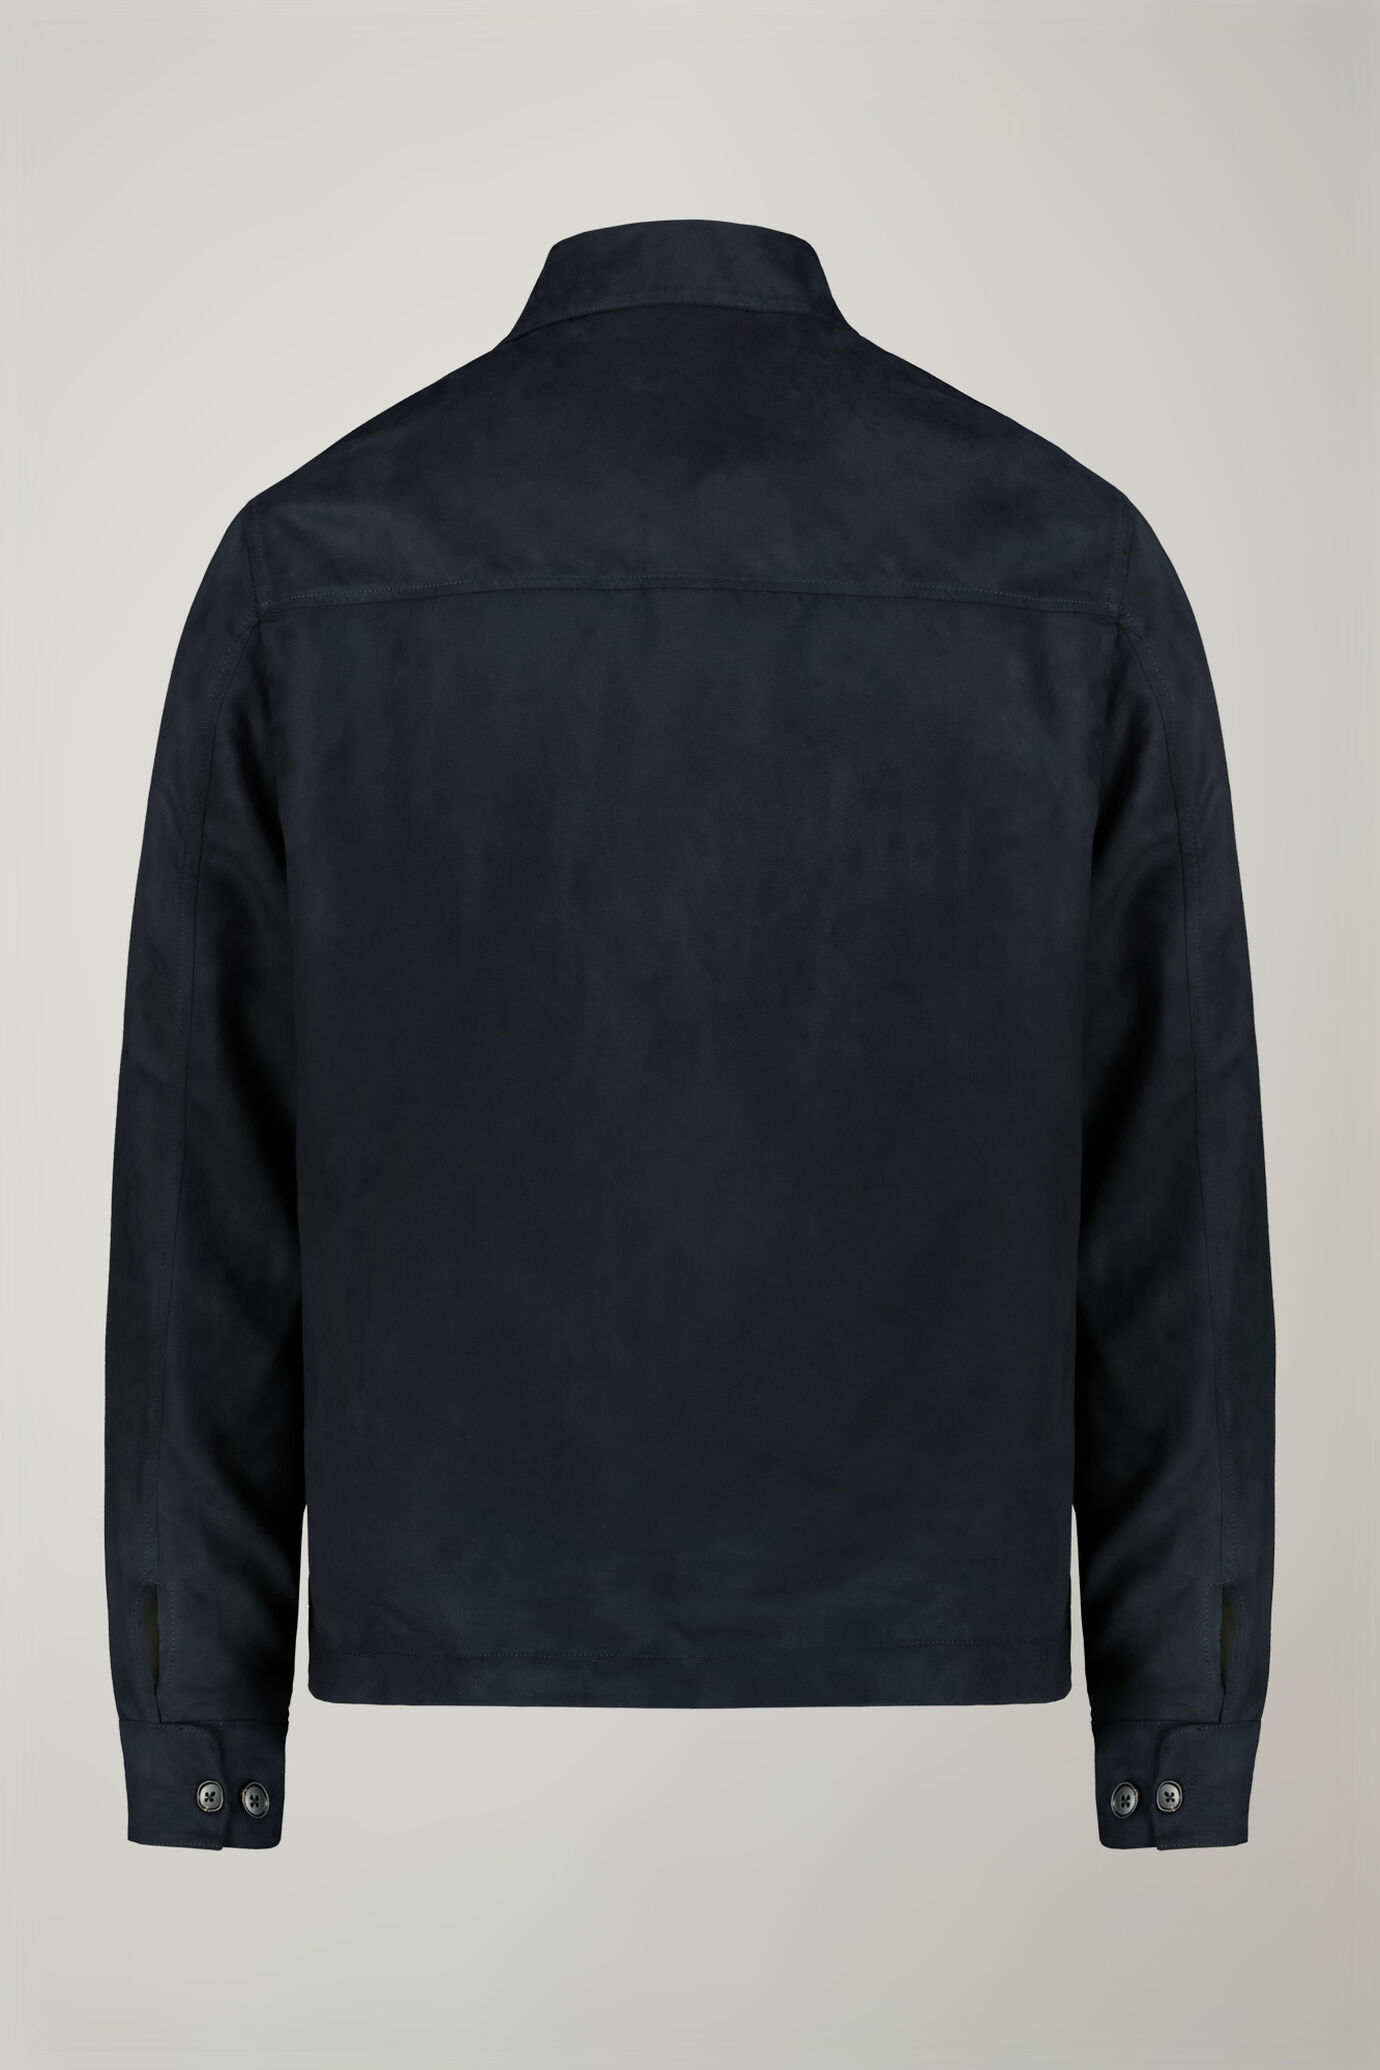 Men's jacket with suede-like fabric regular fit image number 5